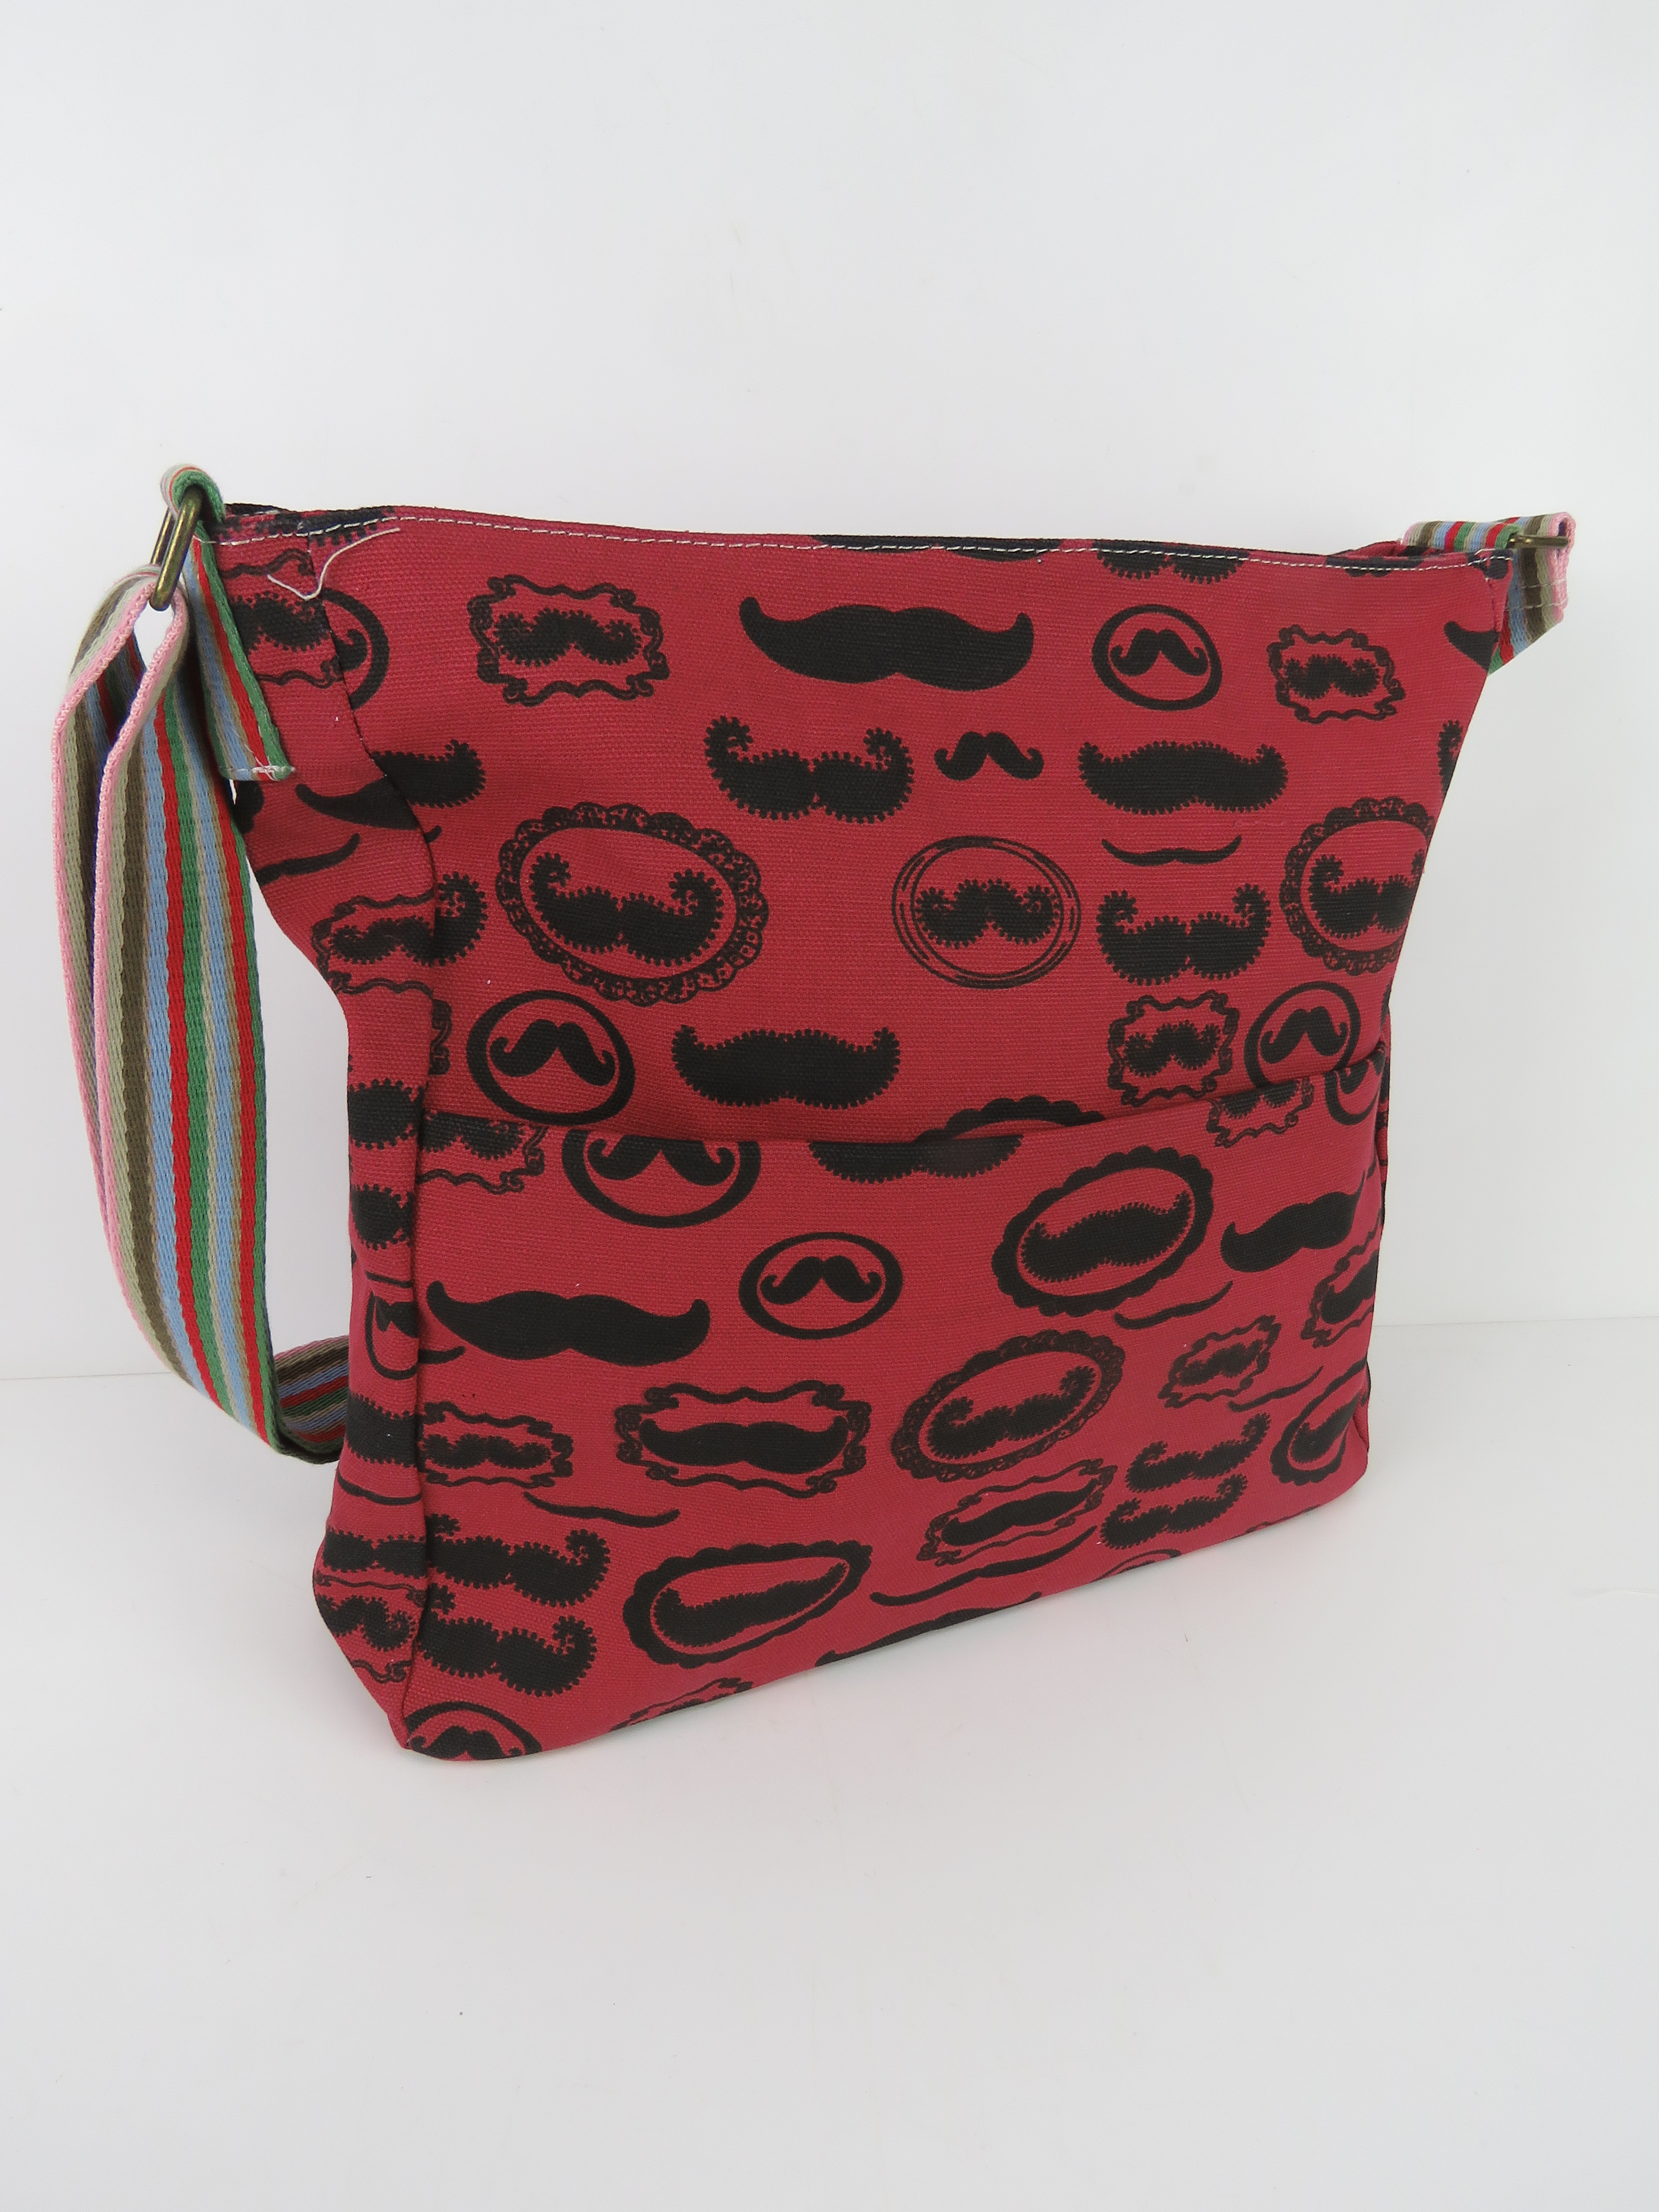 A fabric tote bag having mustache patter